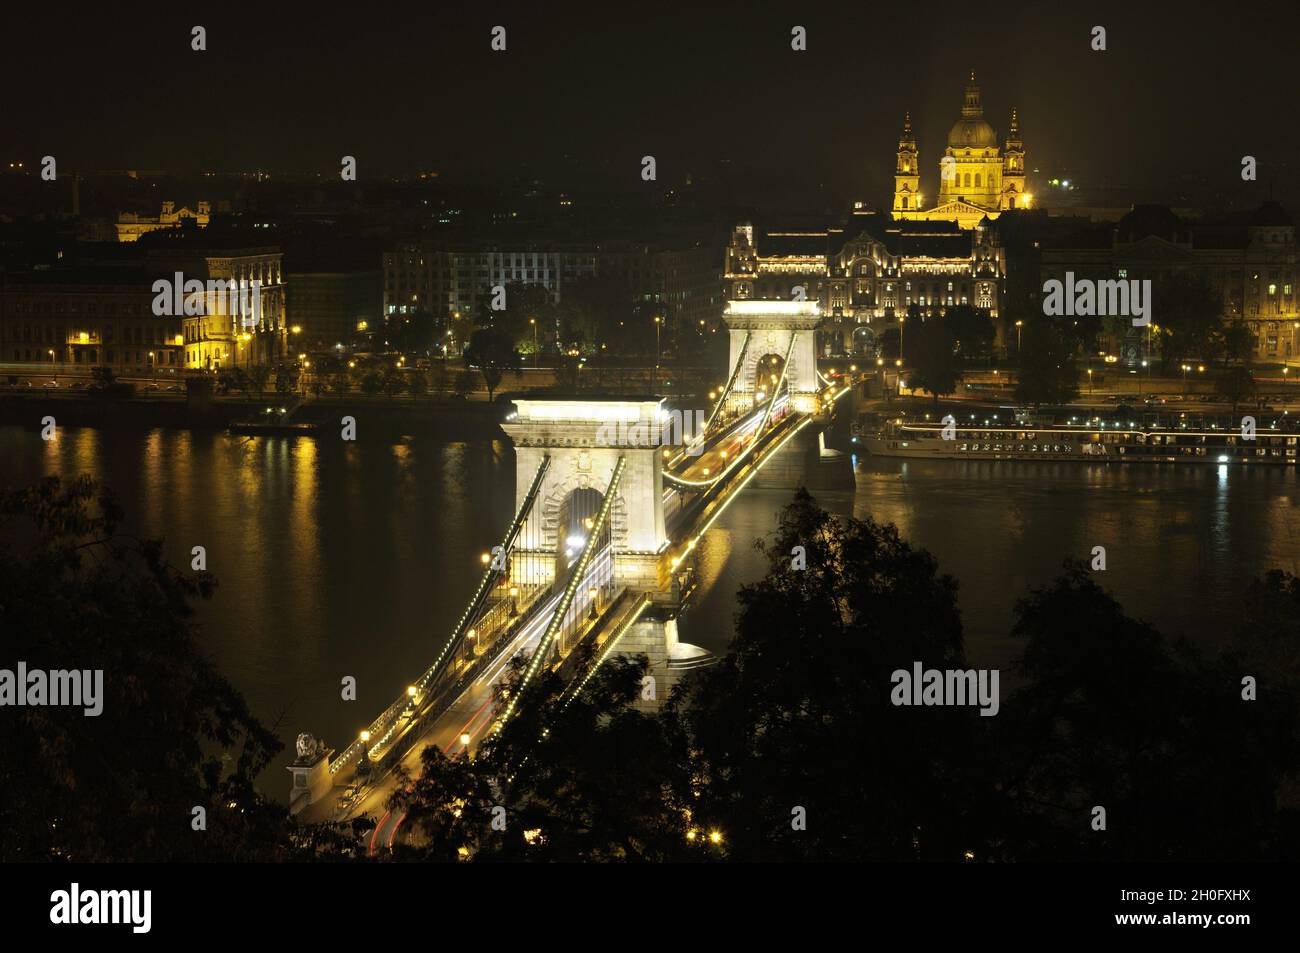 Szechenyi Chain Bridge in front of St Stephen's Basilica at night in Budapest, Hungary Stock Photo